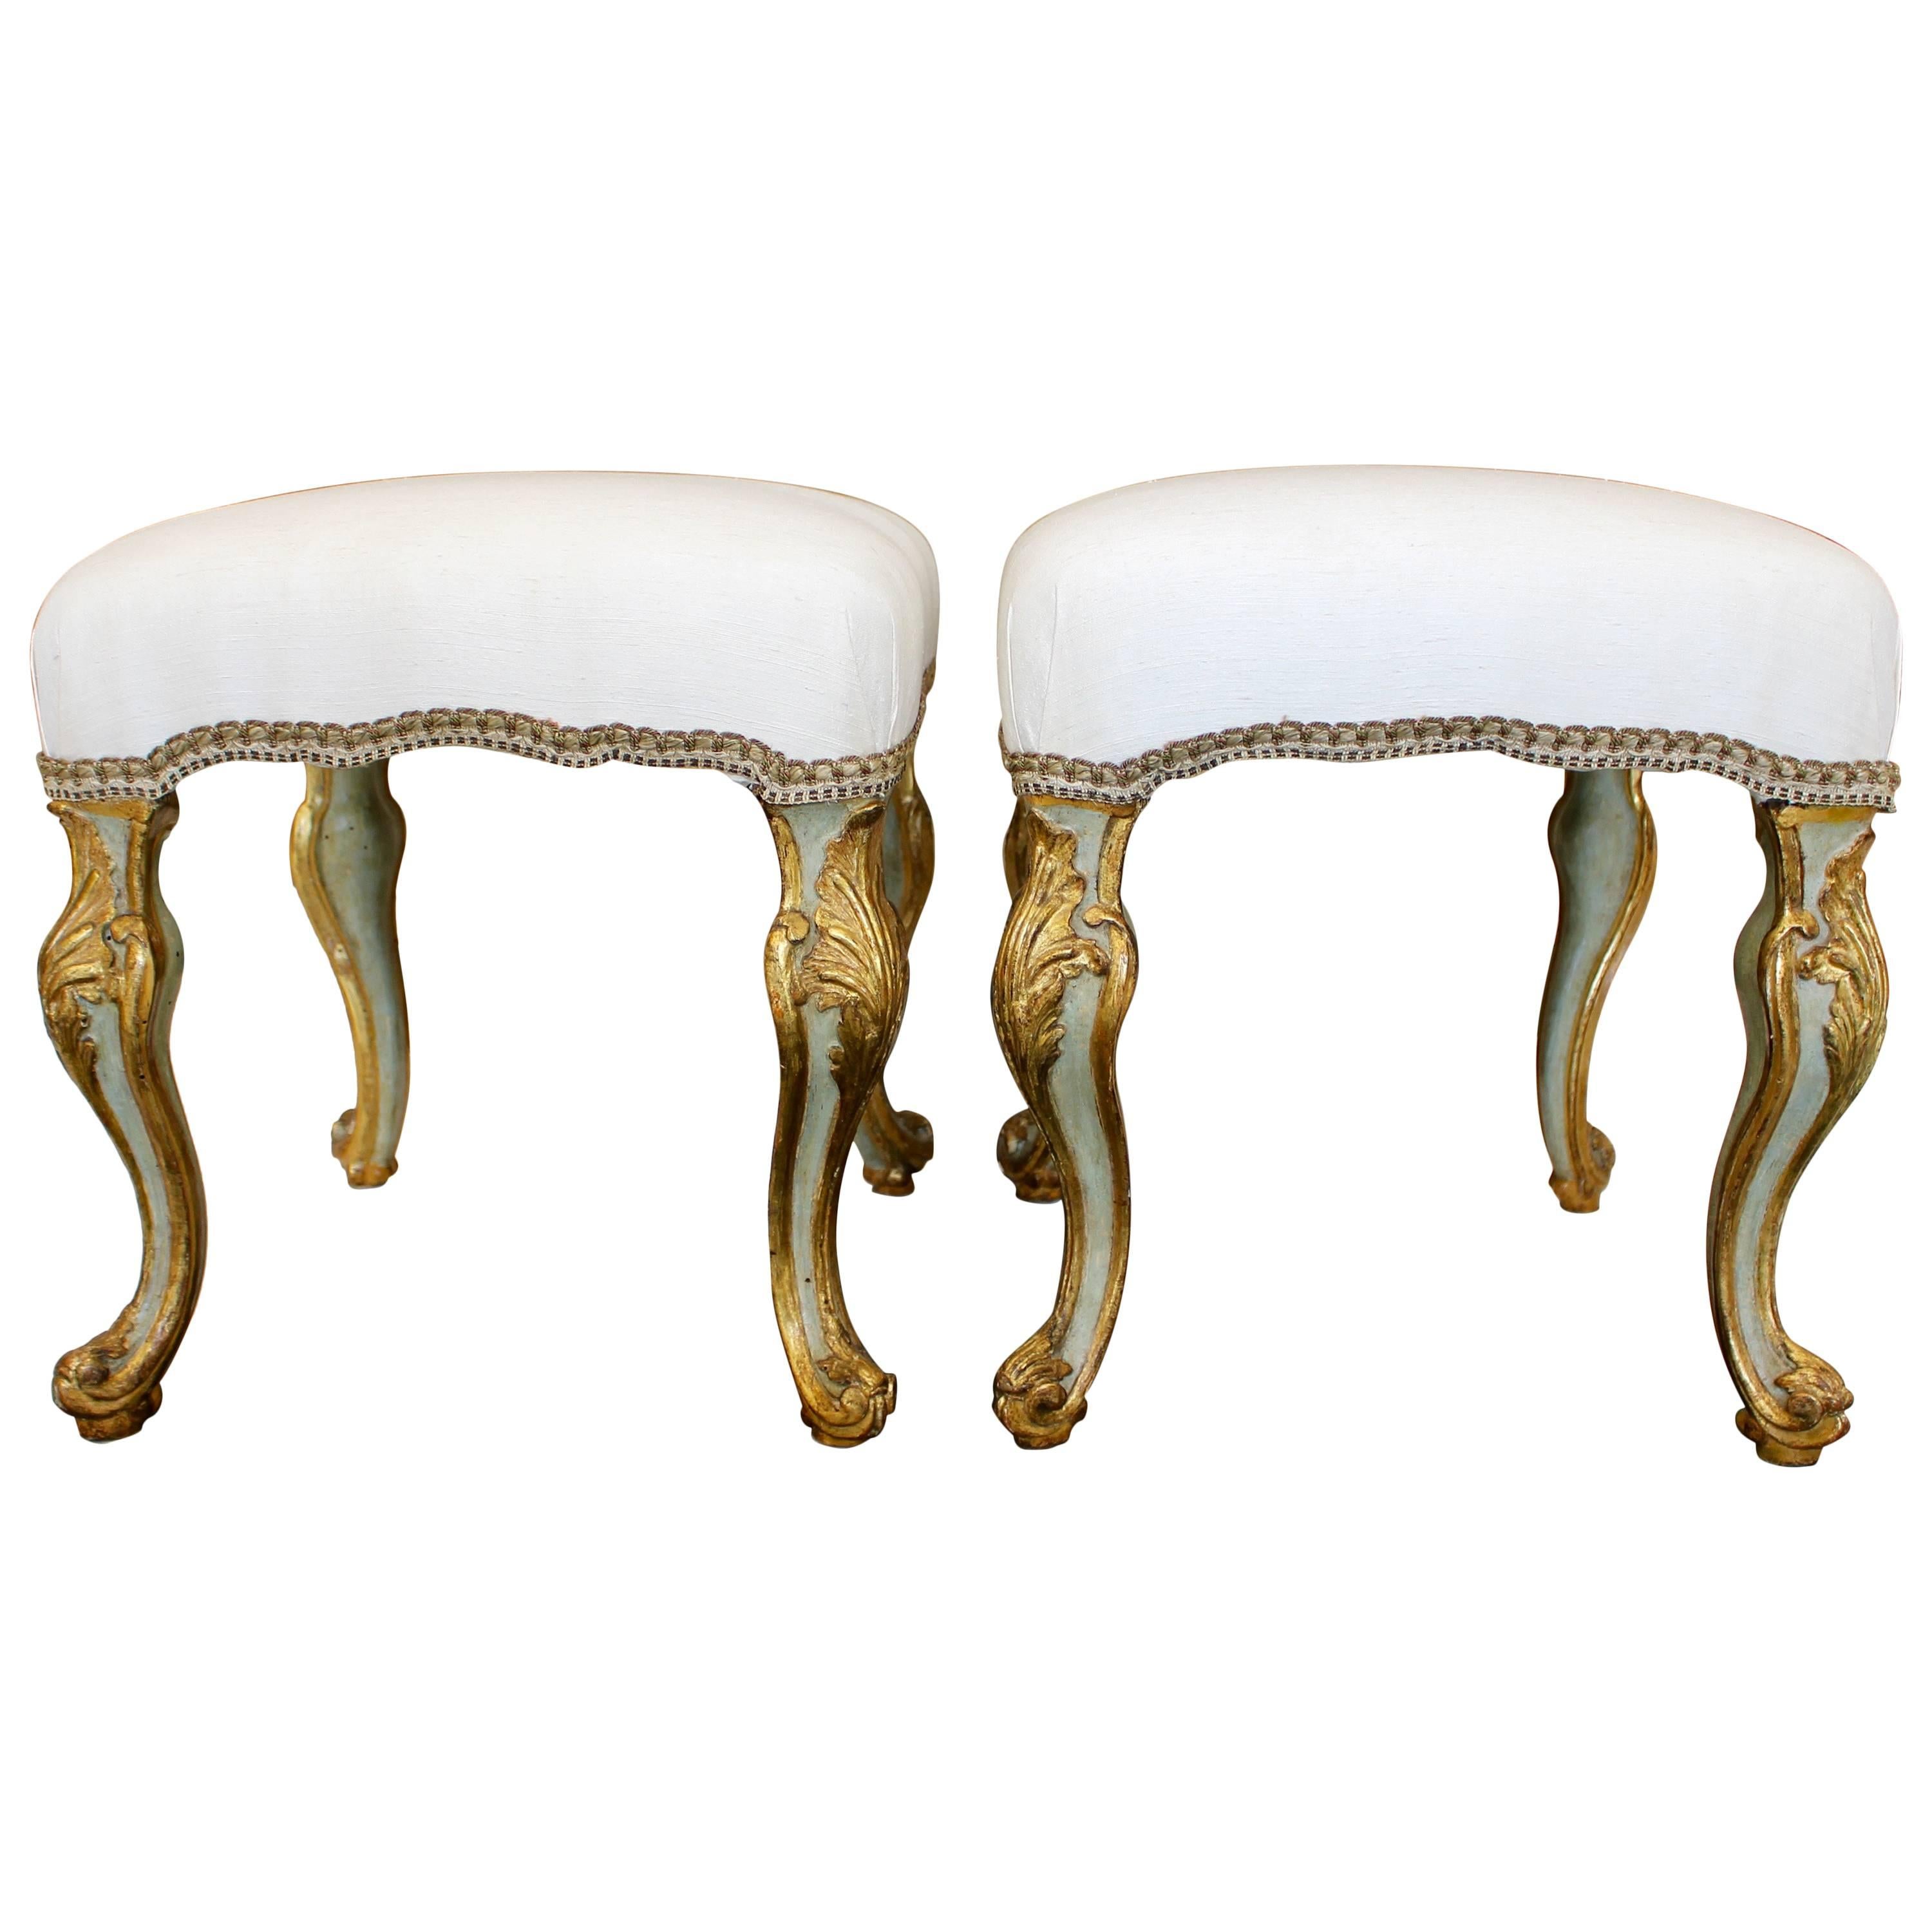 Pair of 1750s Italian Piedmontese Rococo Blue-Painted and Parcel-Gilt Stools